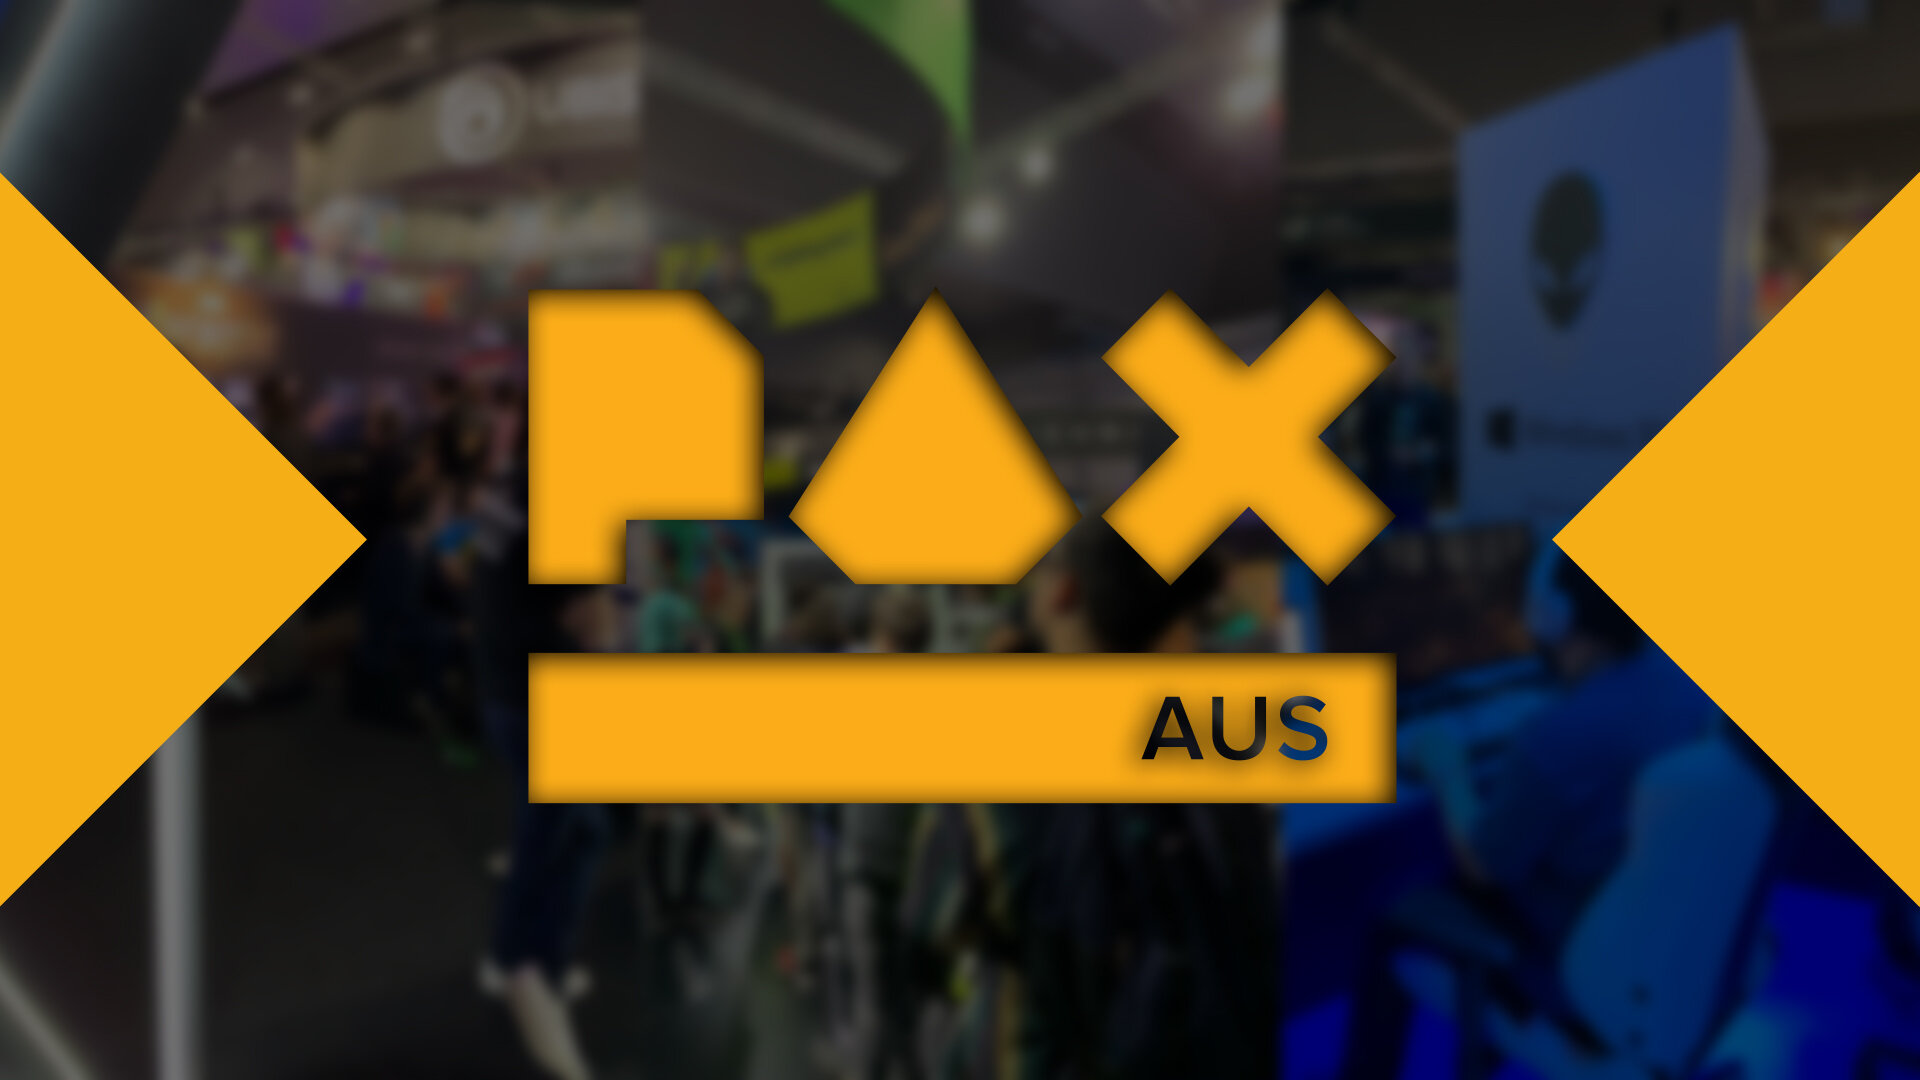 PAX Australia 2021 is bringing the show back to the real world — MaxiGeek